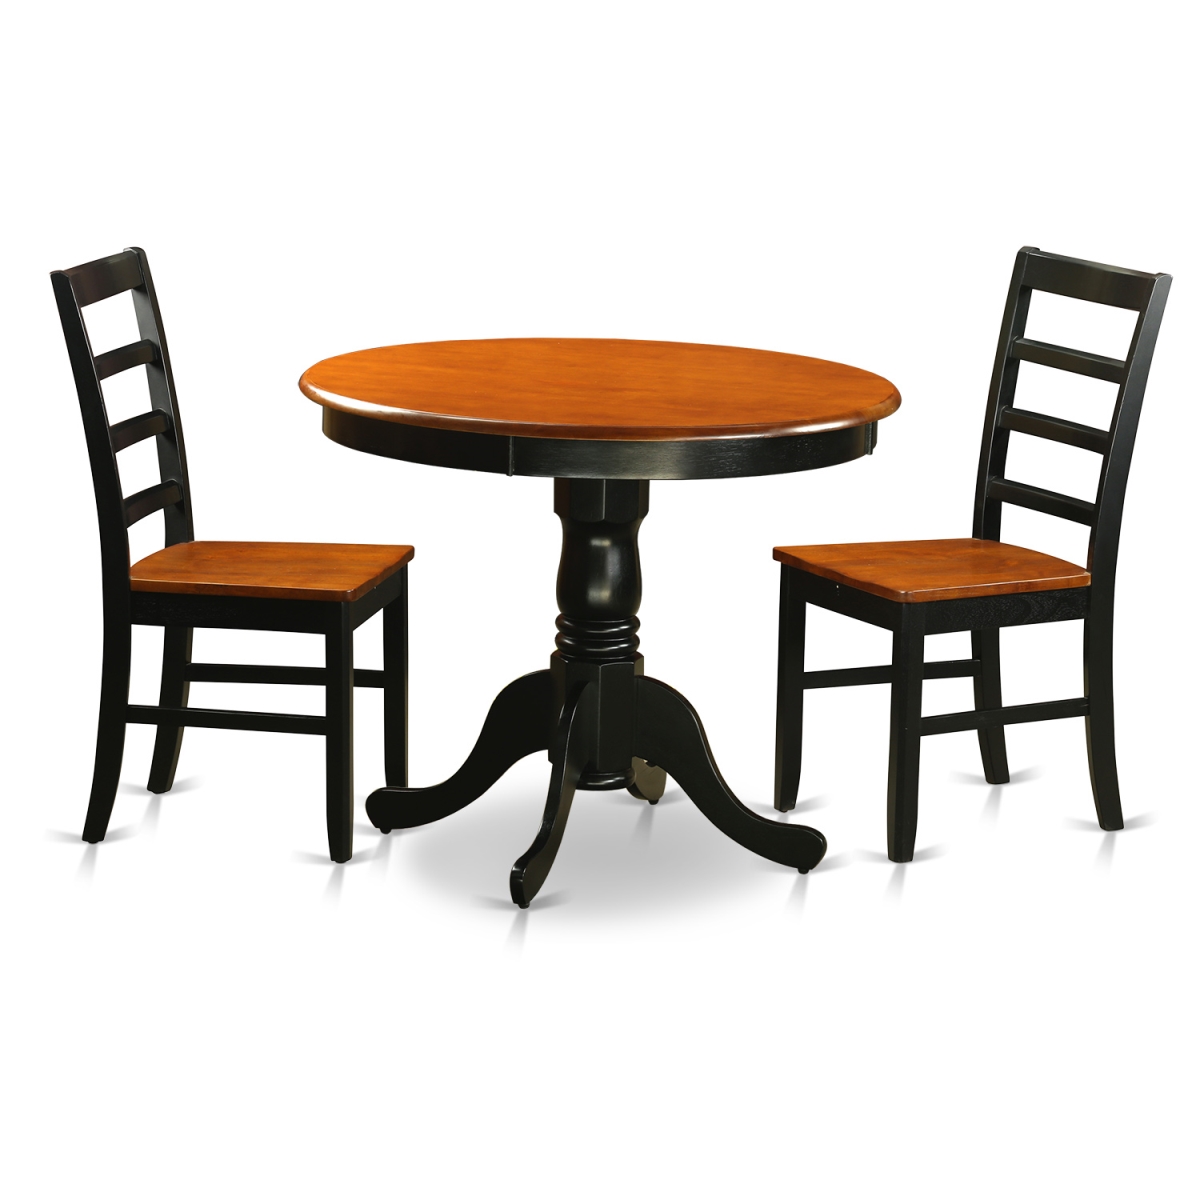 Picture of East West Furniture ANPF3-BLK-W Dining Furniture Set with 2 Wooden Chairs, Black & Cherry - 3 Piece